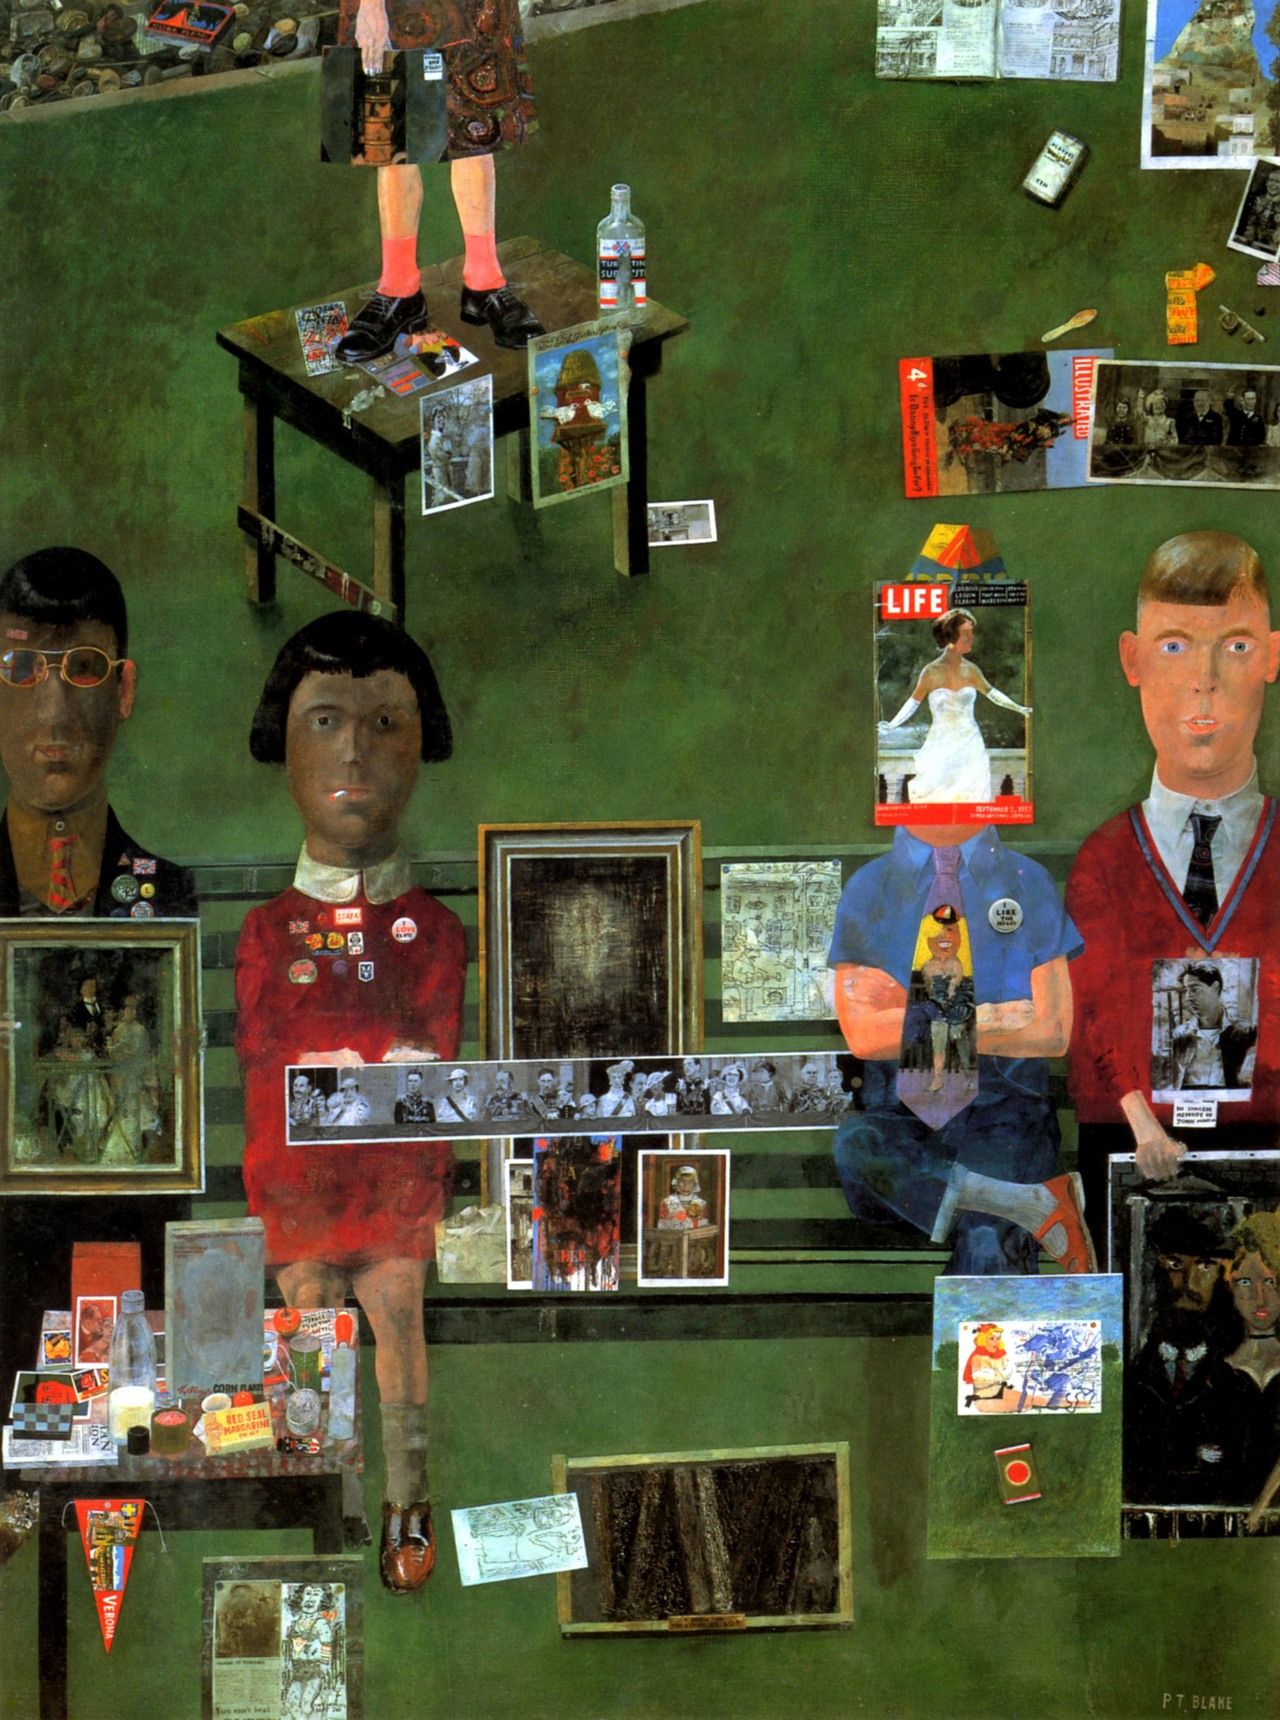 Peter Blake, On the Balcony. 1955-7 | A R T | Pinterest | Peter ...